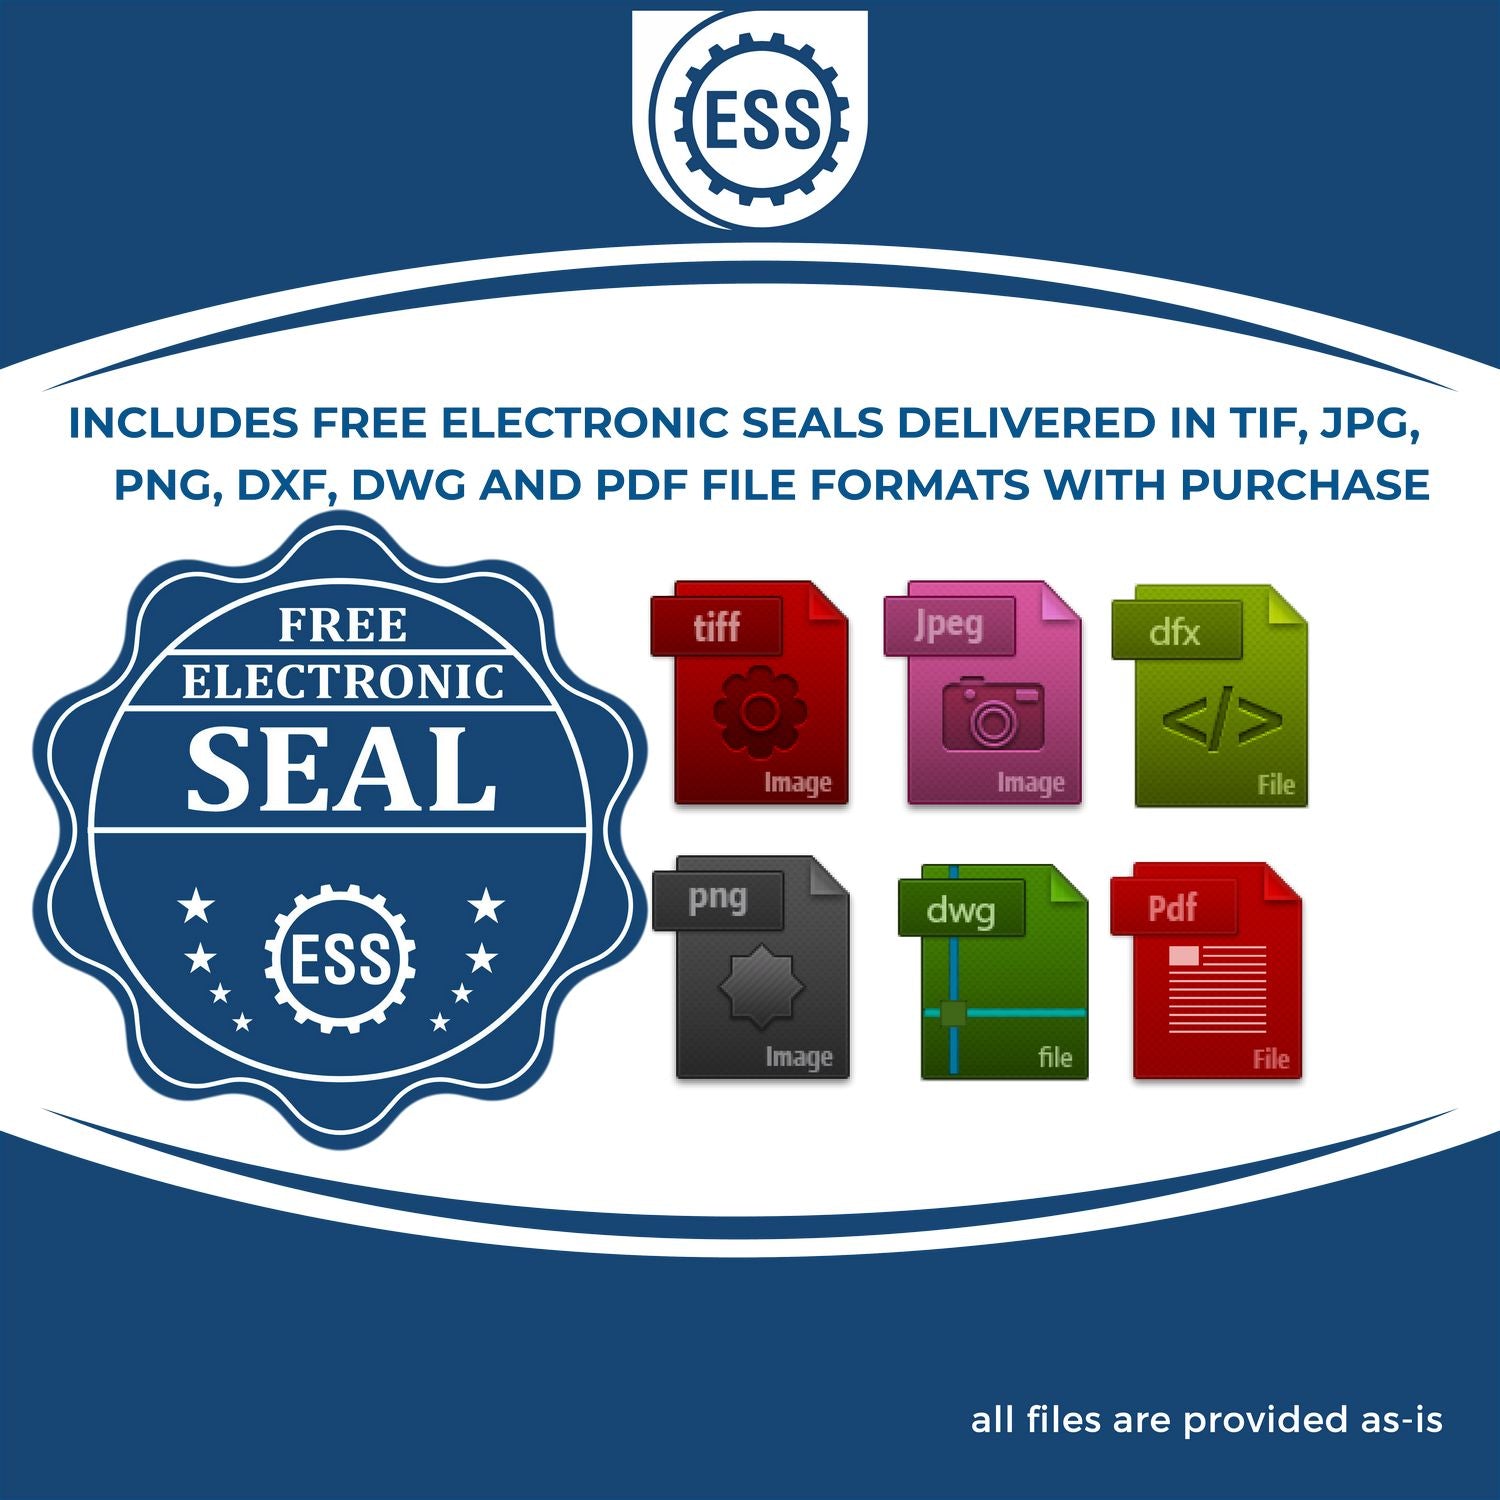 An infographic for the free electronic seal for the Oklahoma Professional Engineer Seal Stamp illustrating the different file type icons such as DXF, DWG, TIF, JPG and PNG.